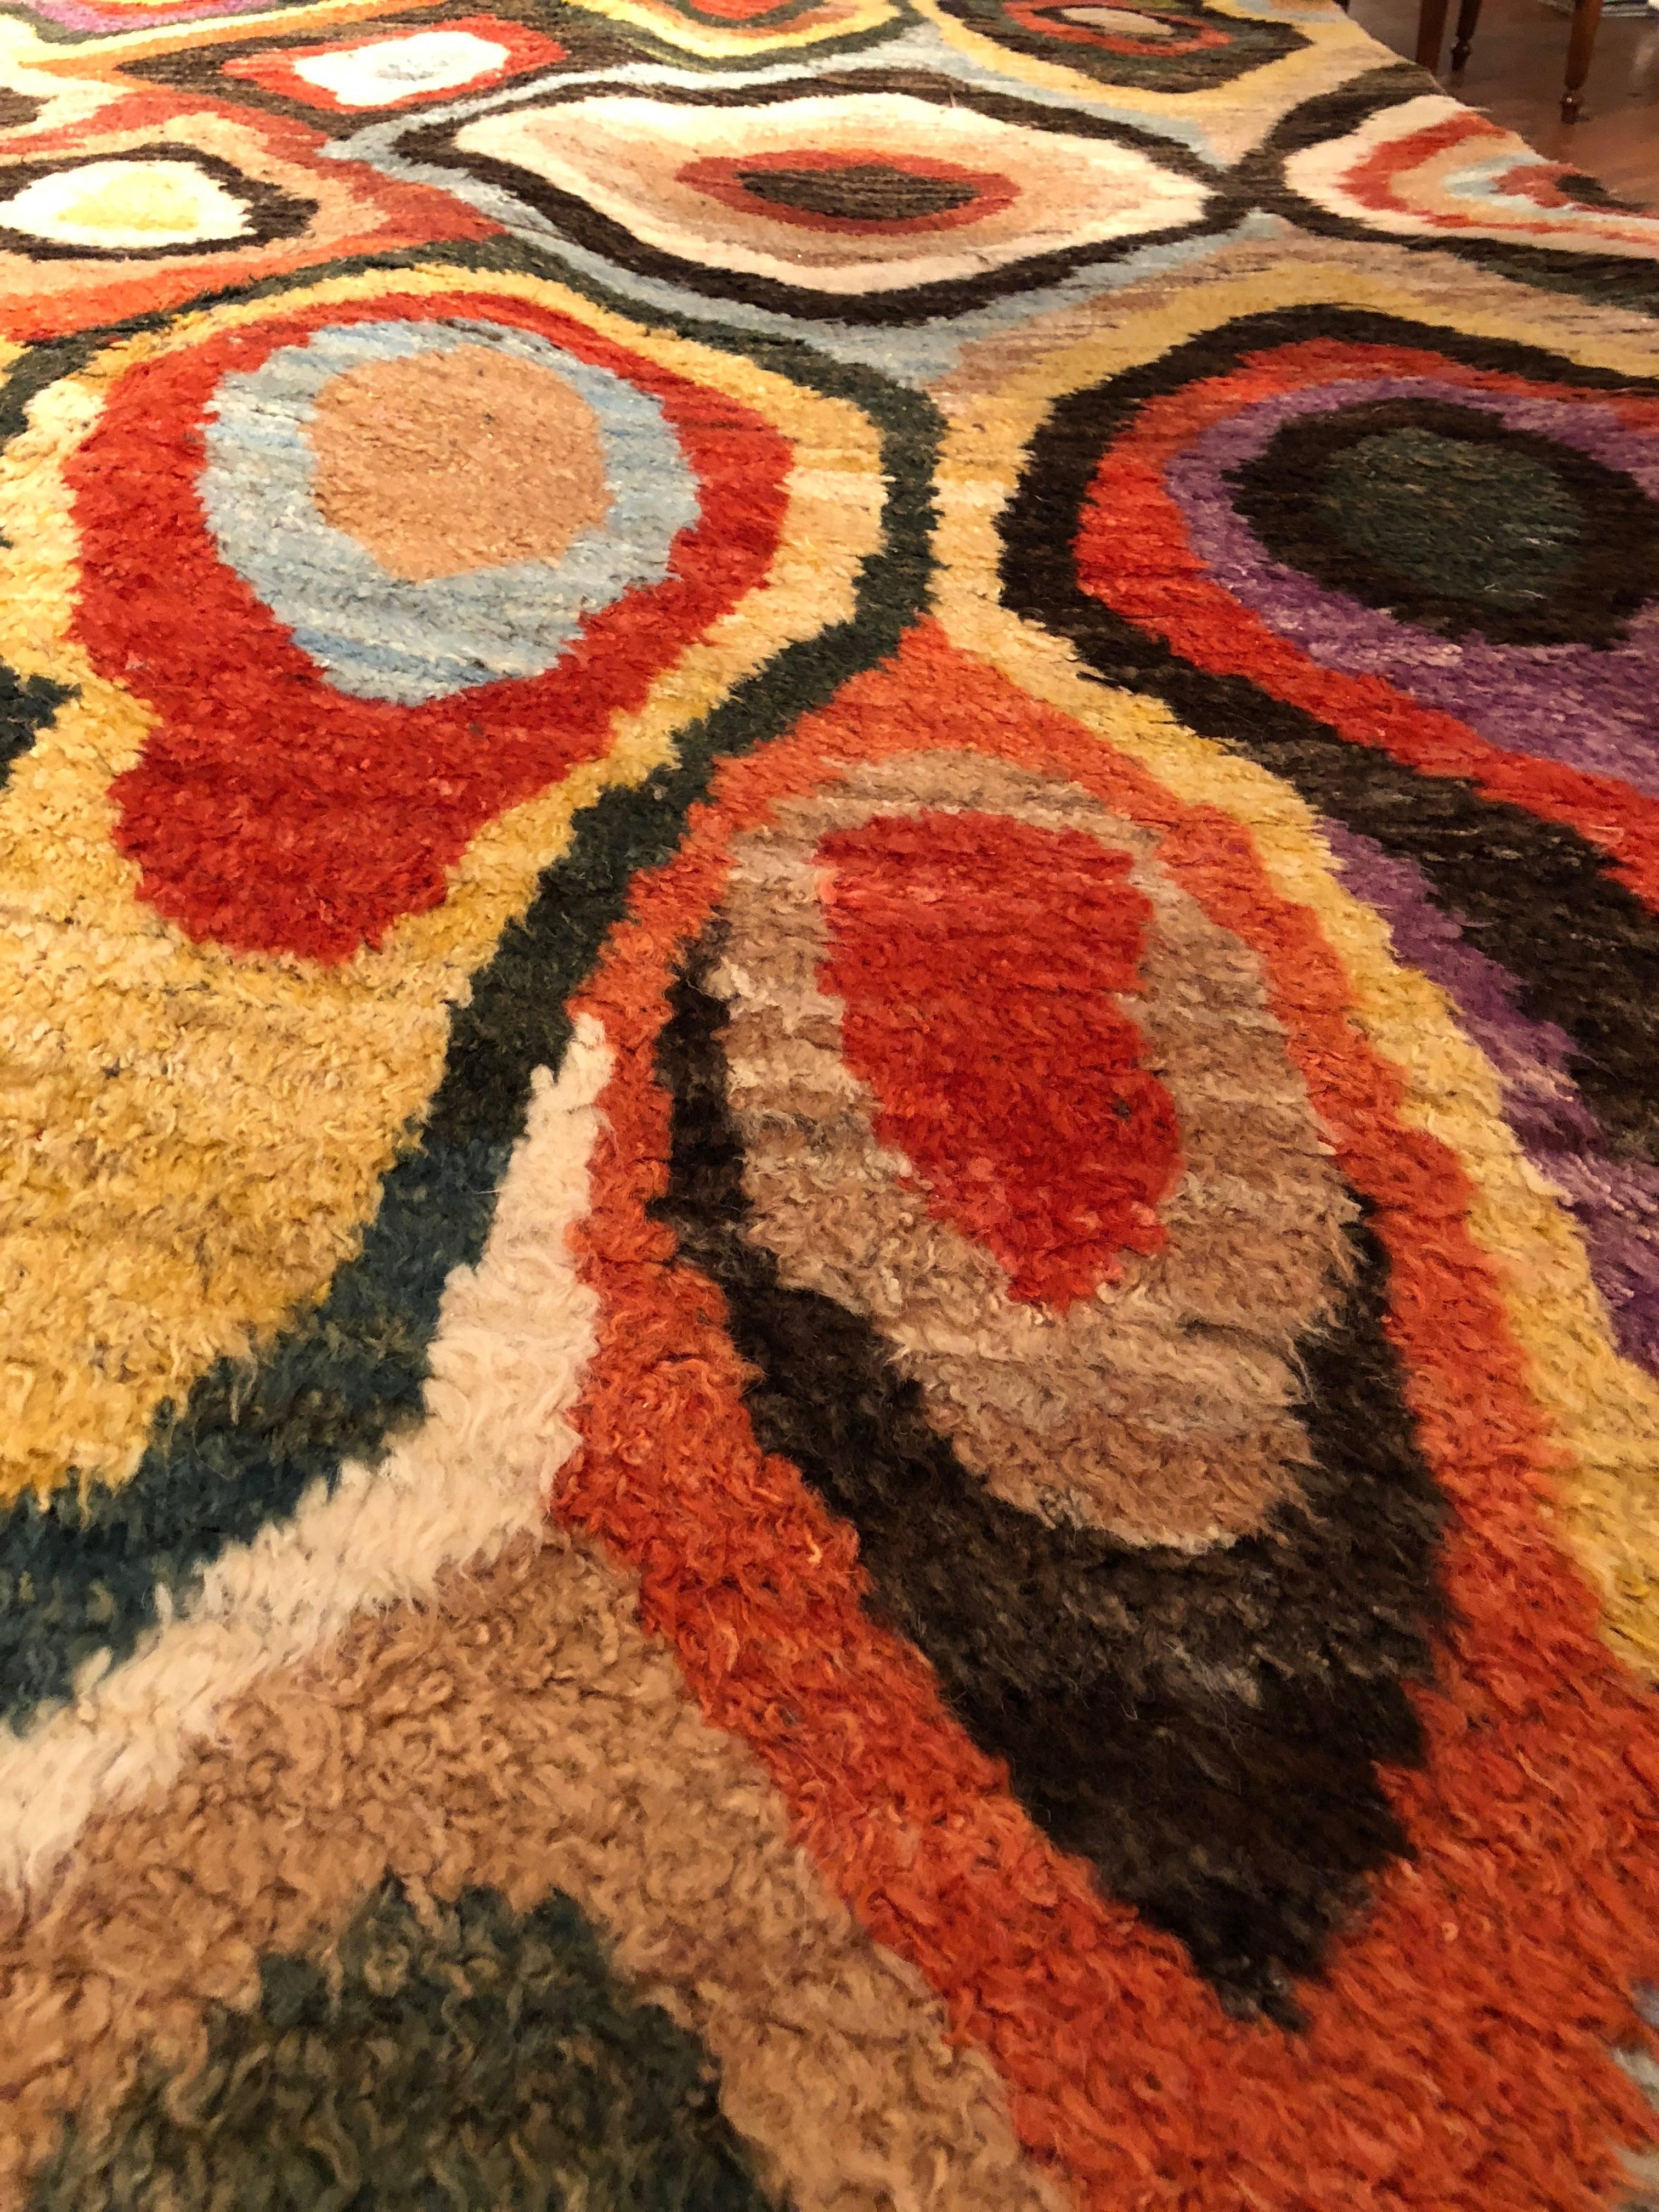 Multicolored and festive, this rug is makes a room. Liven up your living room with this contemporary rug that has a fun personality. Great for a family room or any home that loves their color in their accessories. Can be used to with a totally